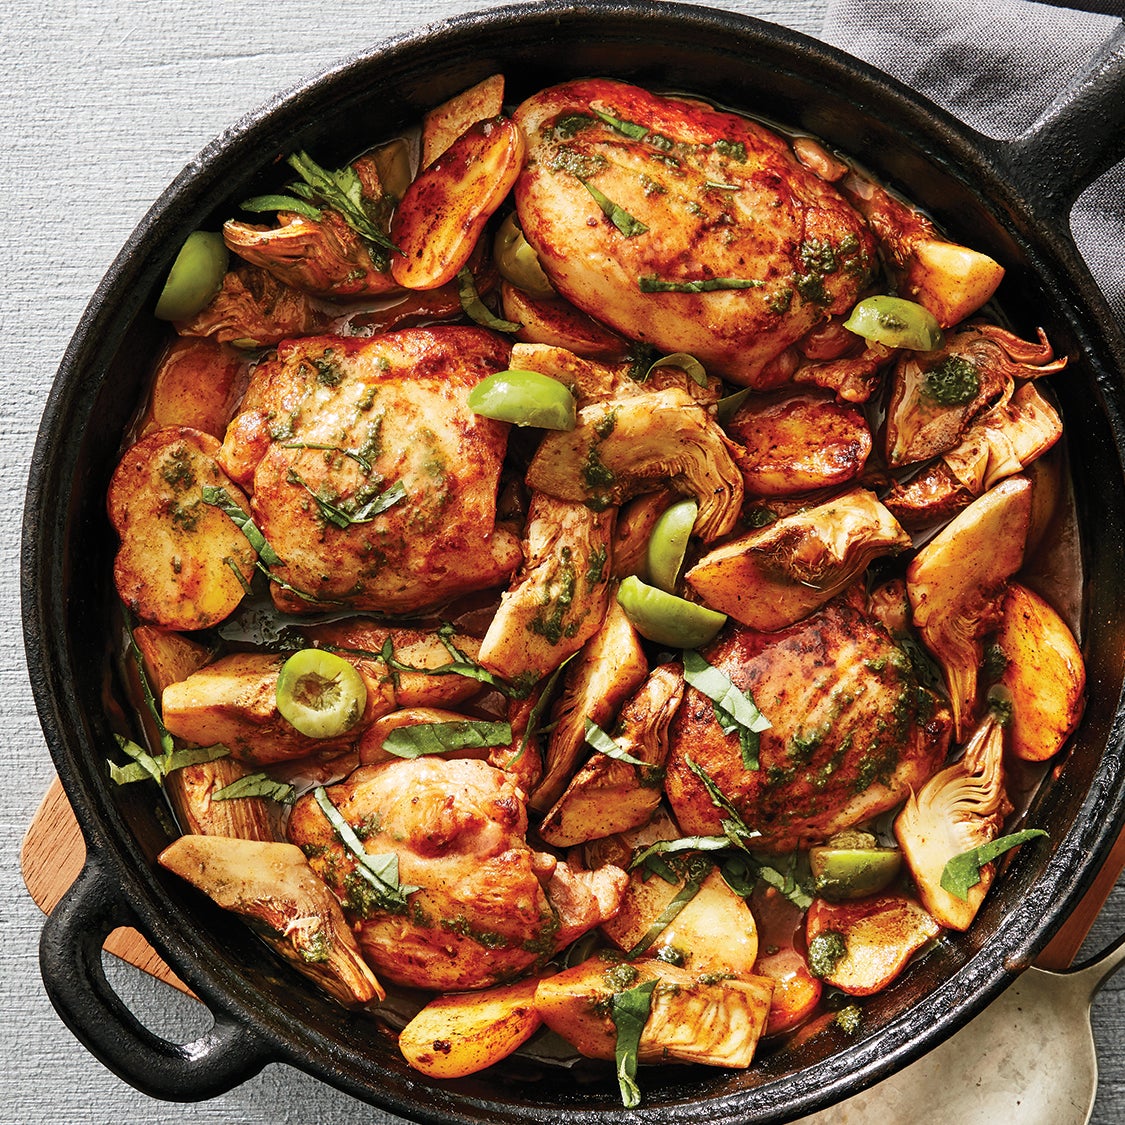 Smoky Braised Chicken & Artichokes with Olives & Basil Purée Recipe